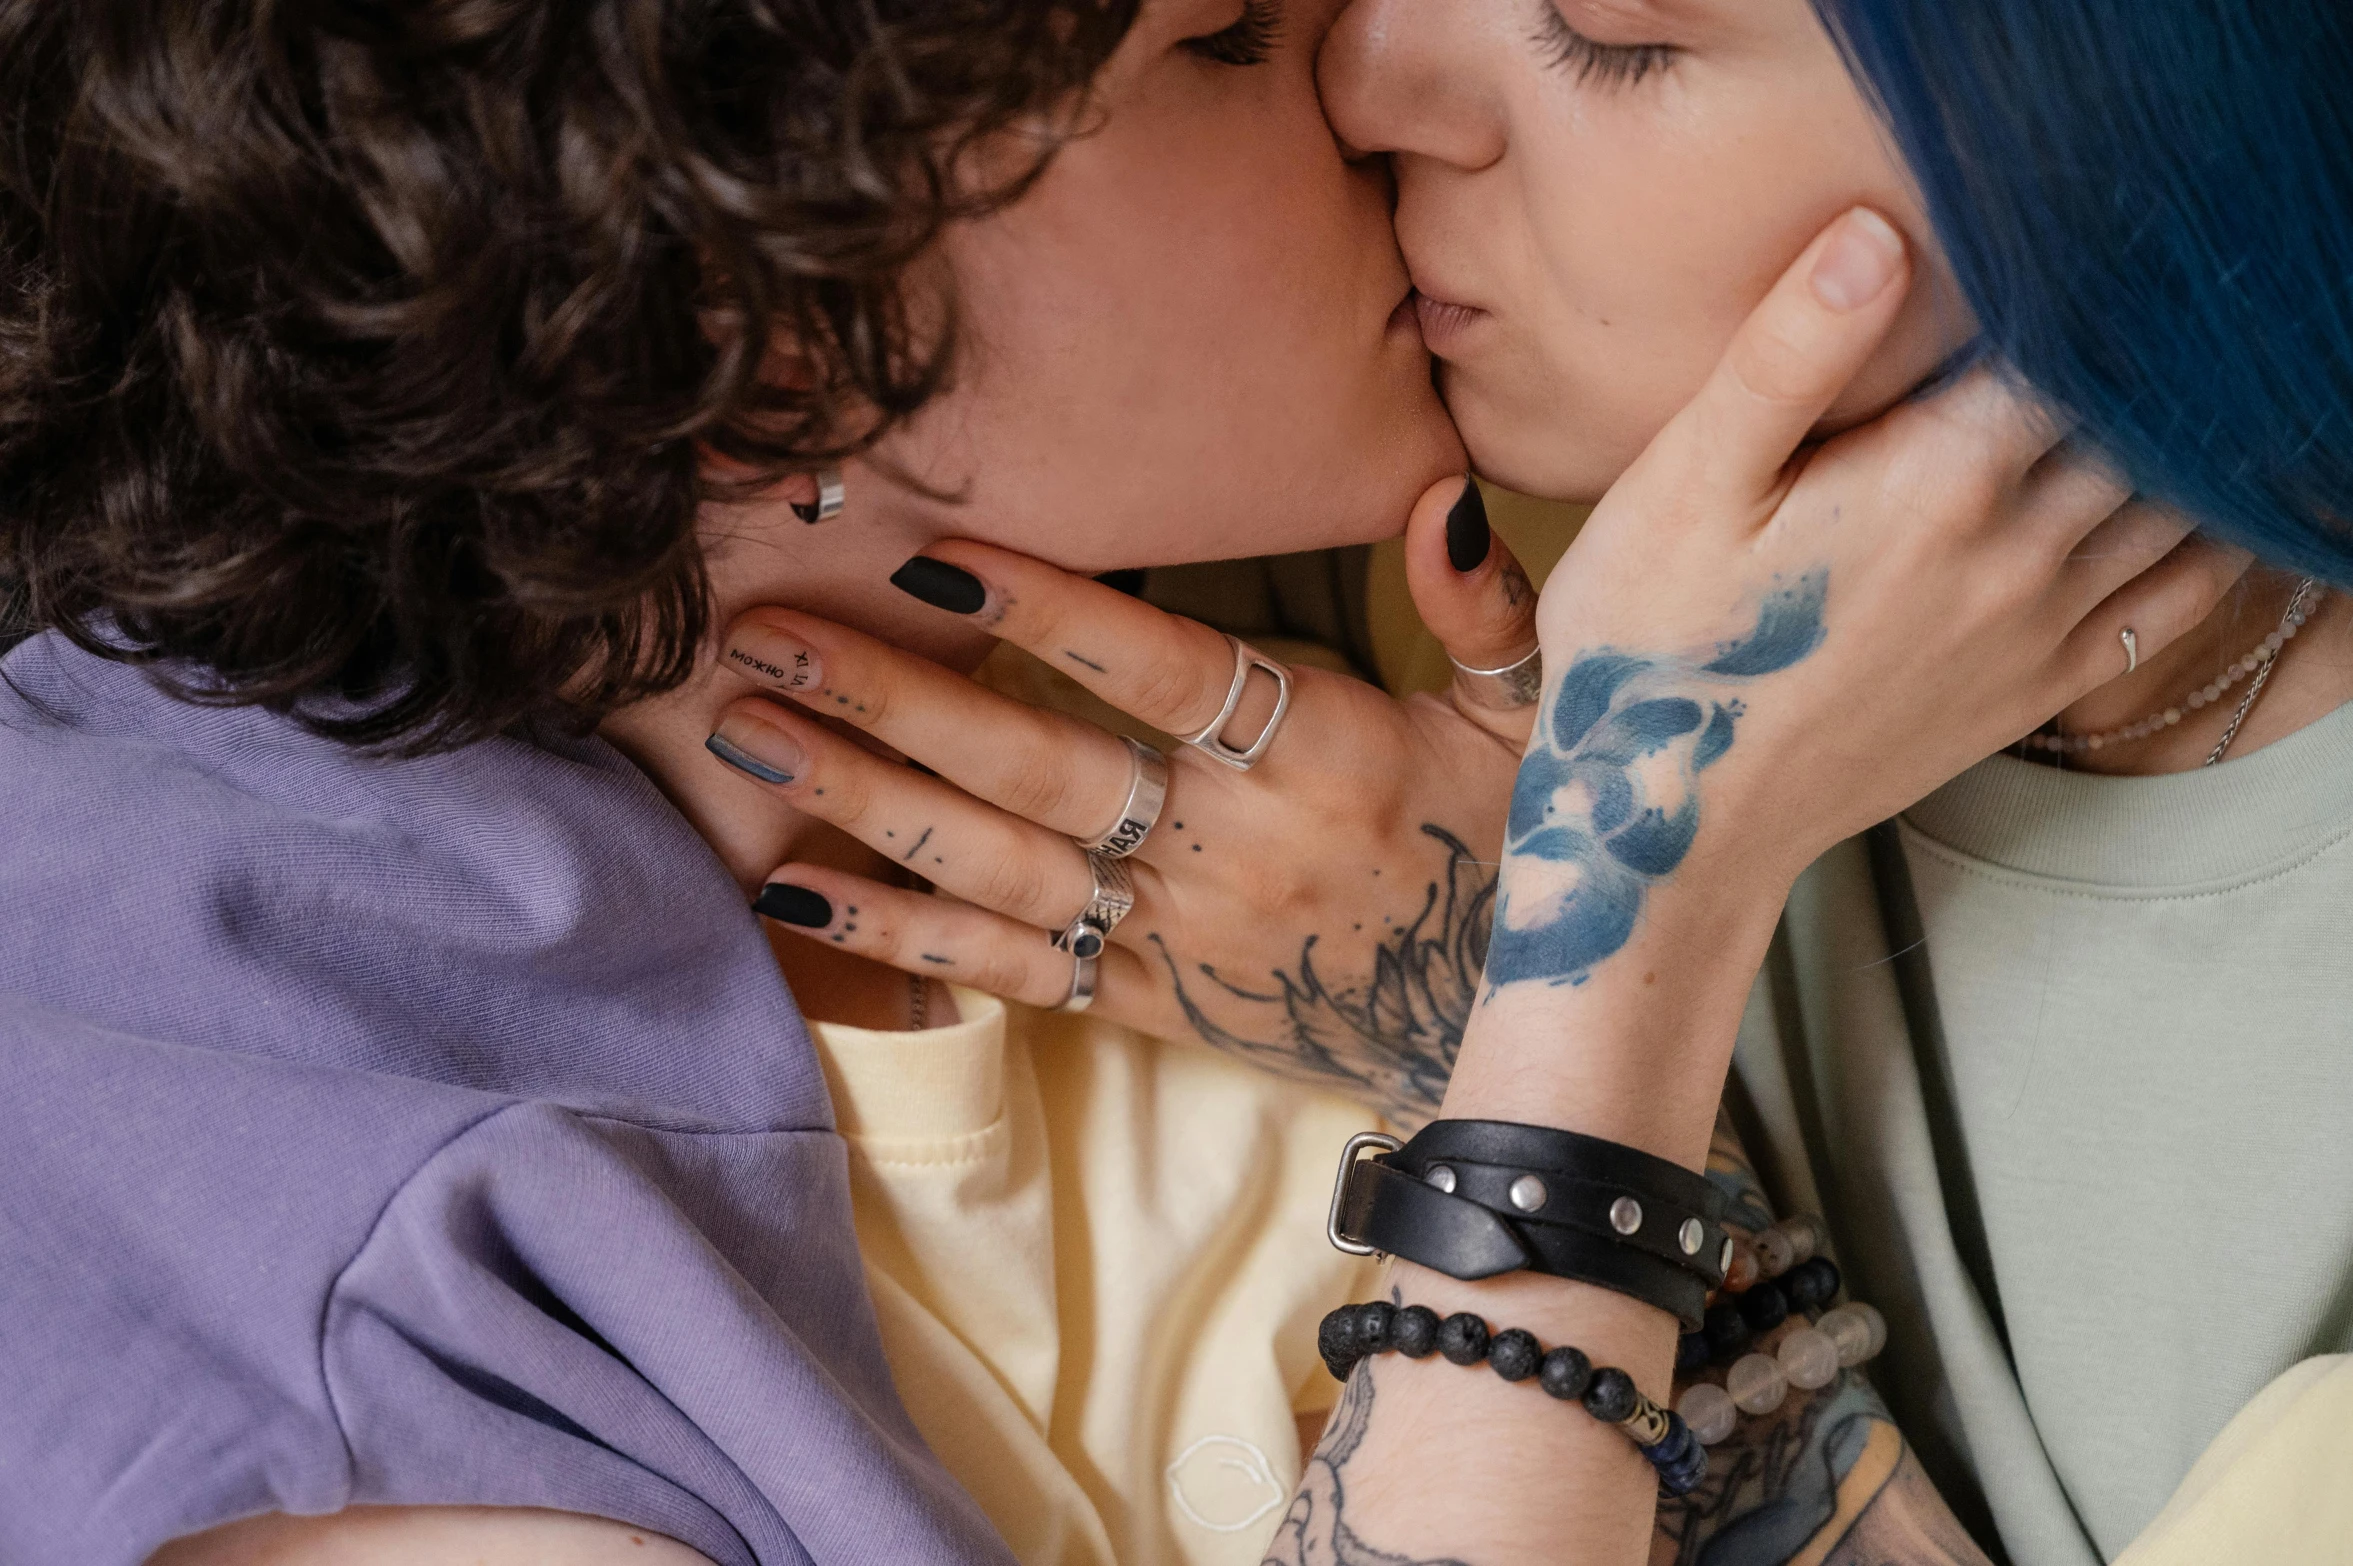 two women with tattoos and piercings kissing on each other